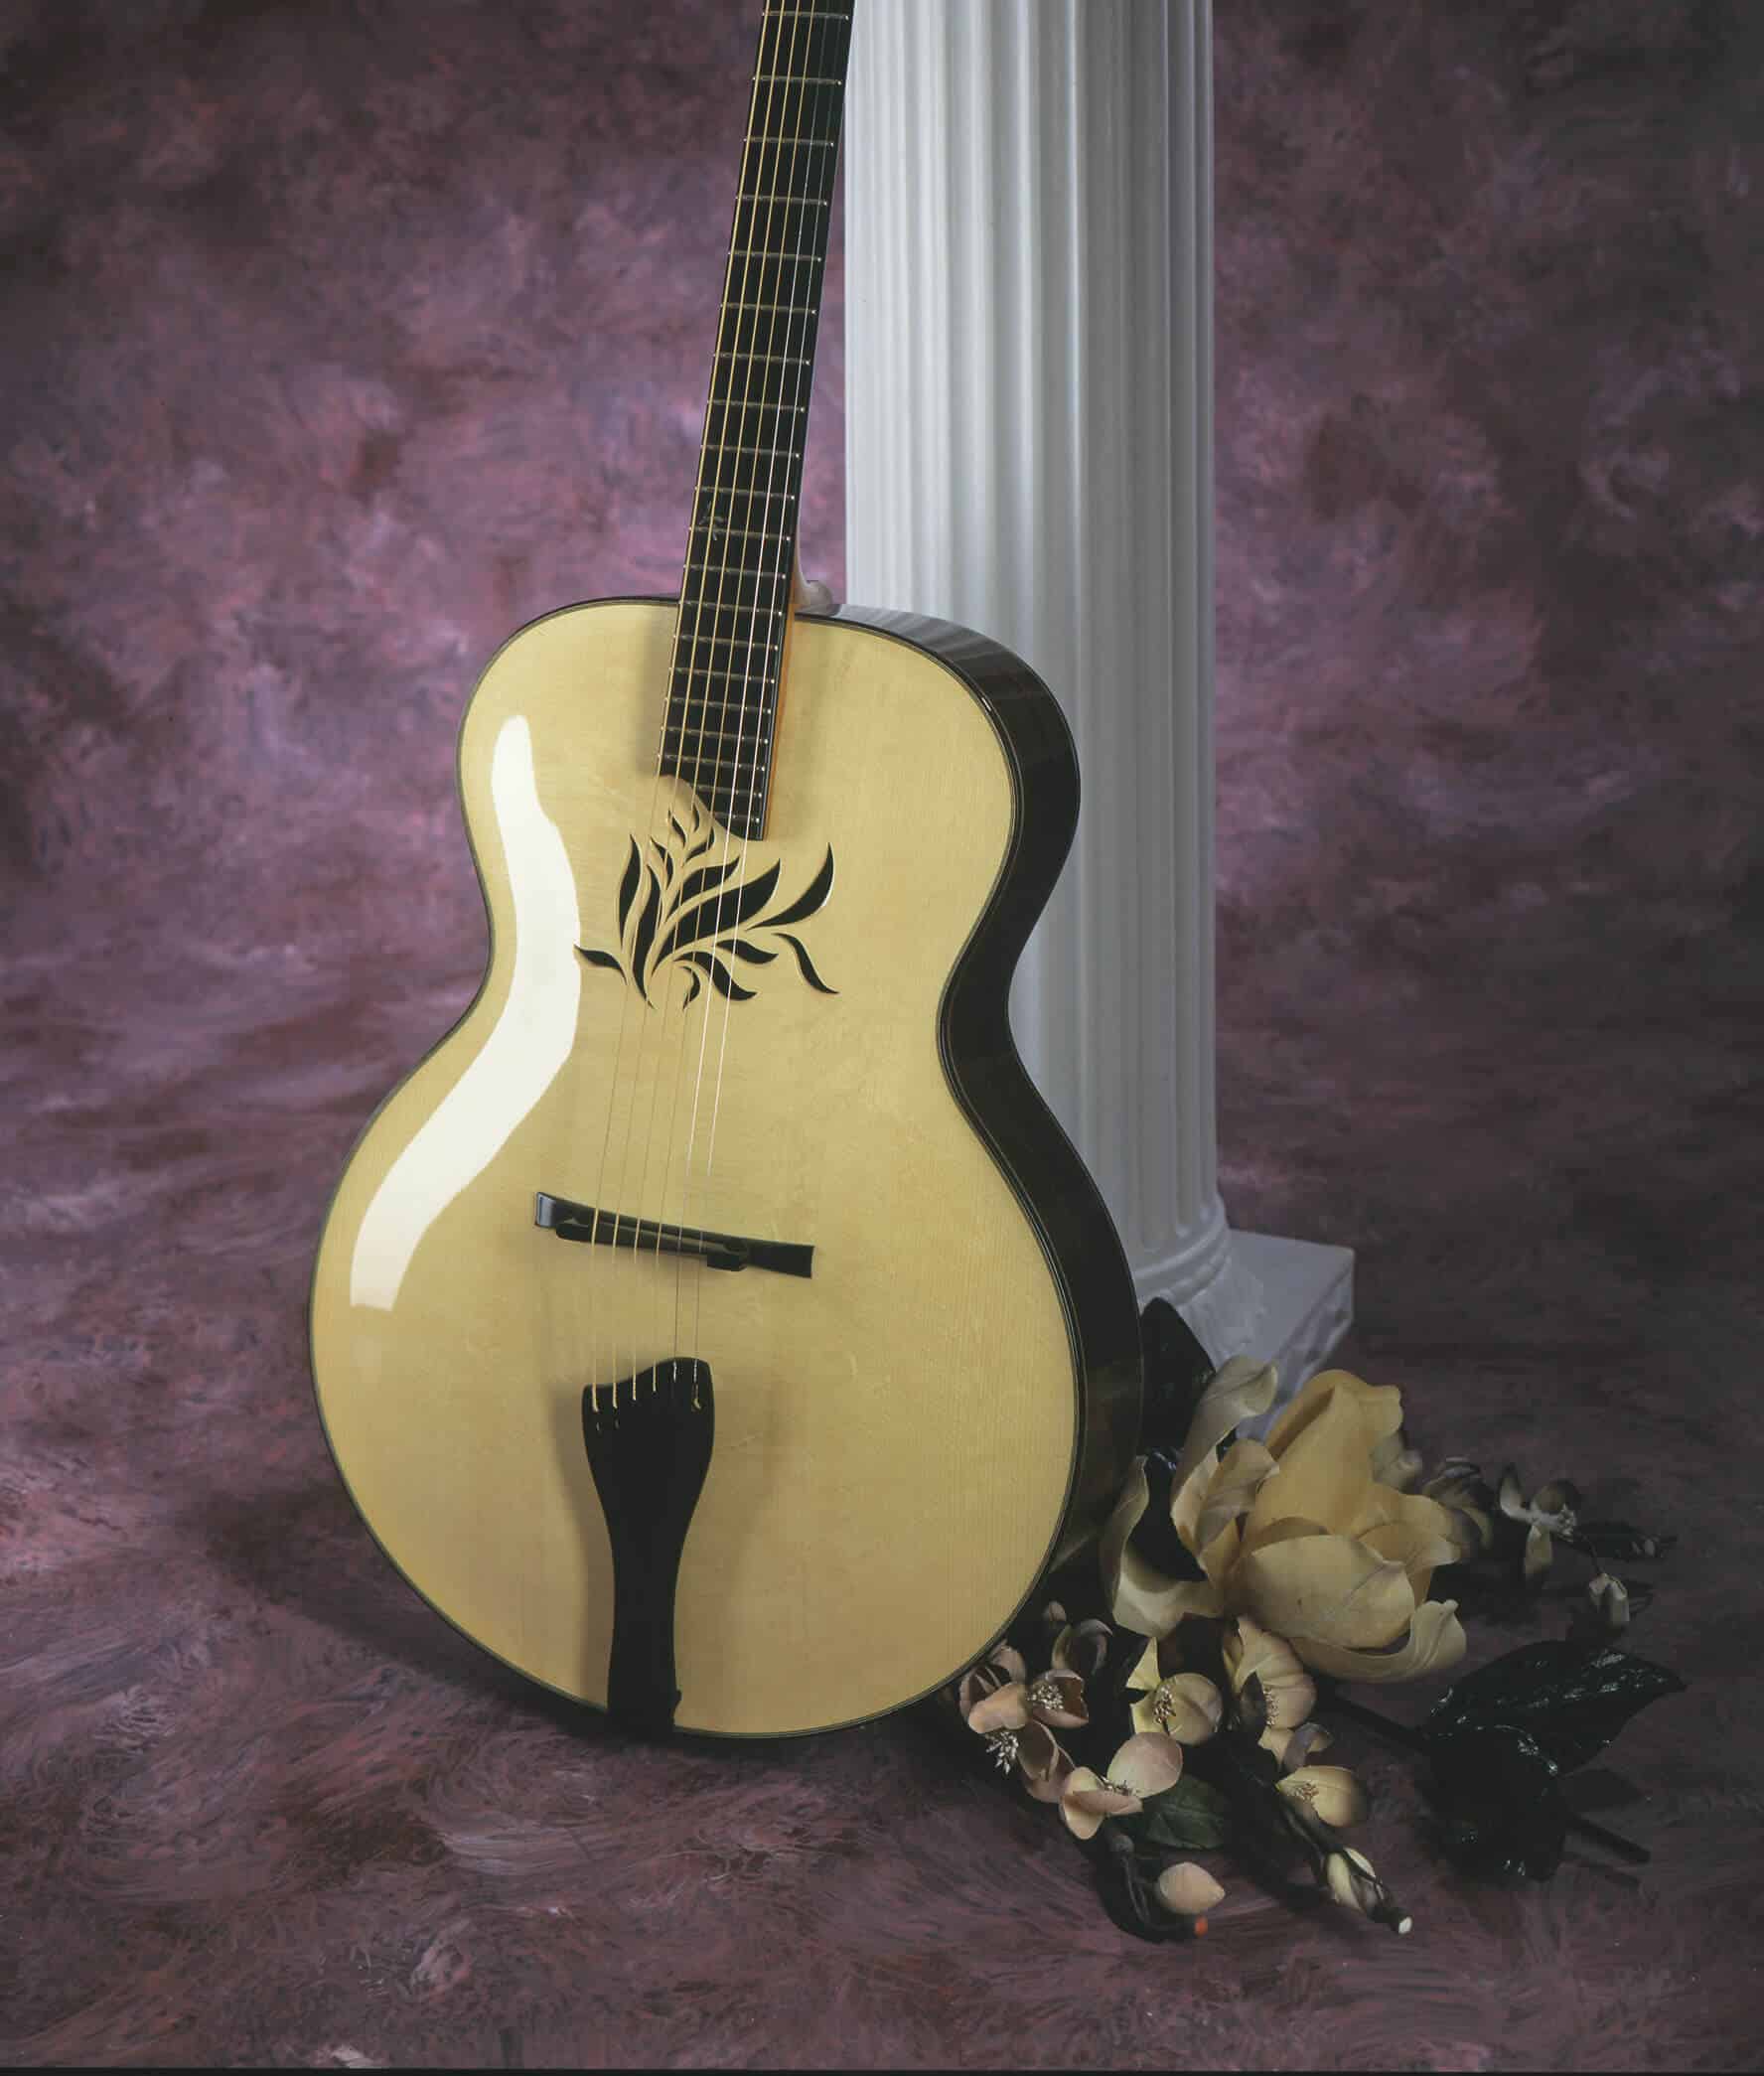 Benedetto Guitar in front of column and purple background